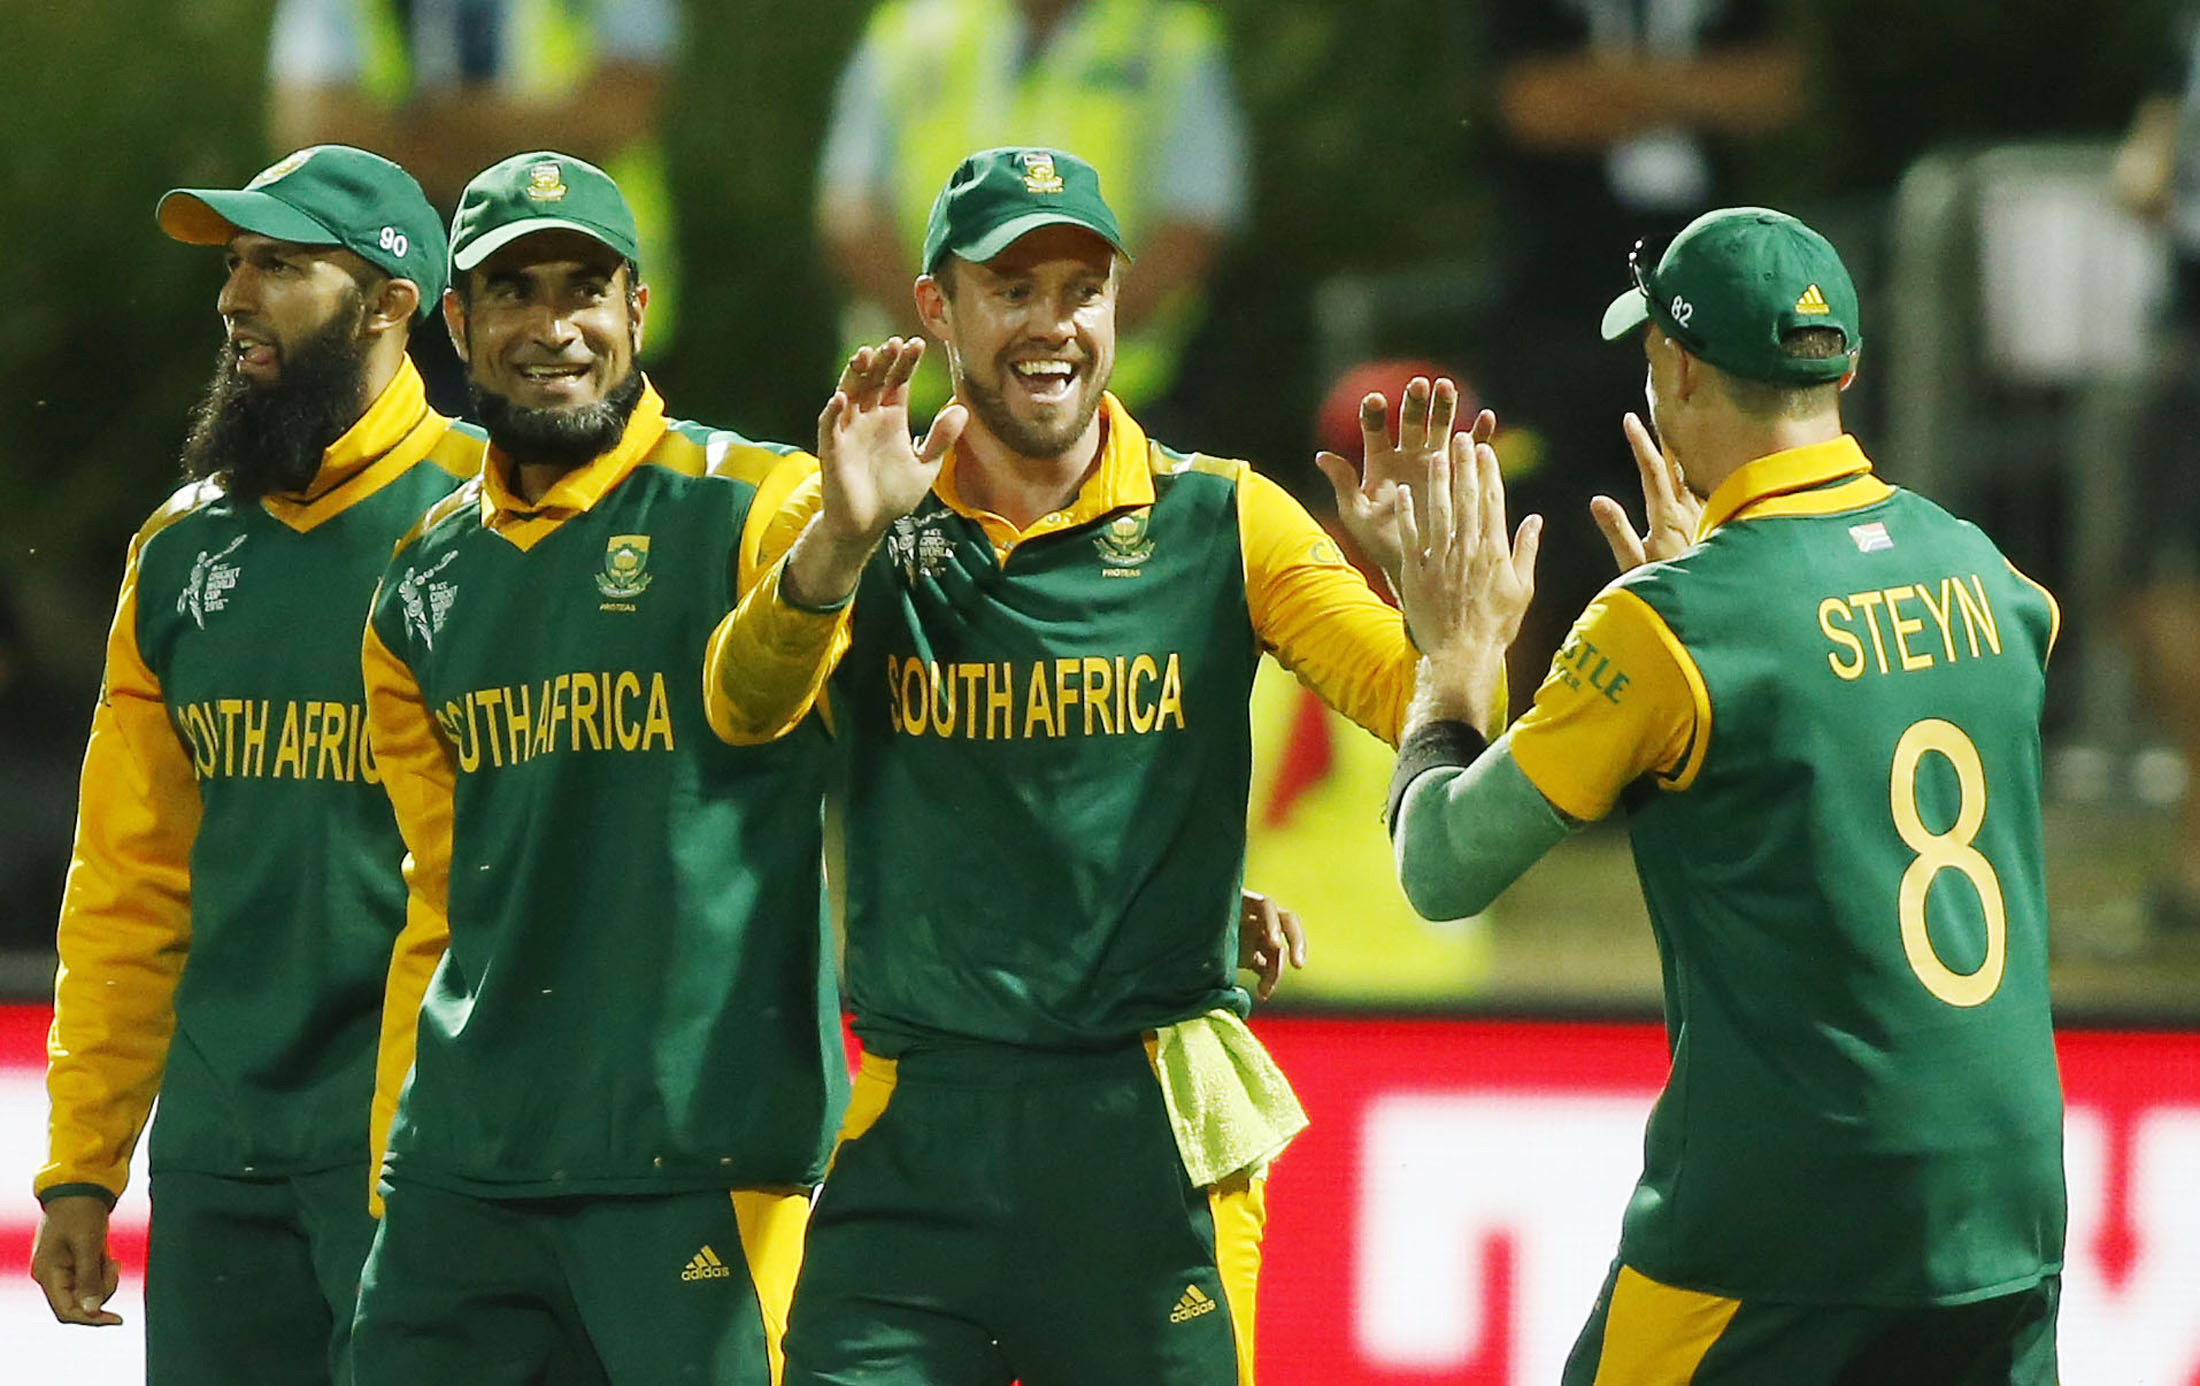 South Africa's De Villiers celebrates with team mate Steyn after dismissing Zimbabwe's Mire out caught during their Cricket World Cup match in Hamilton